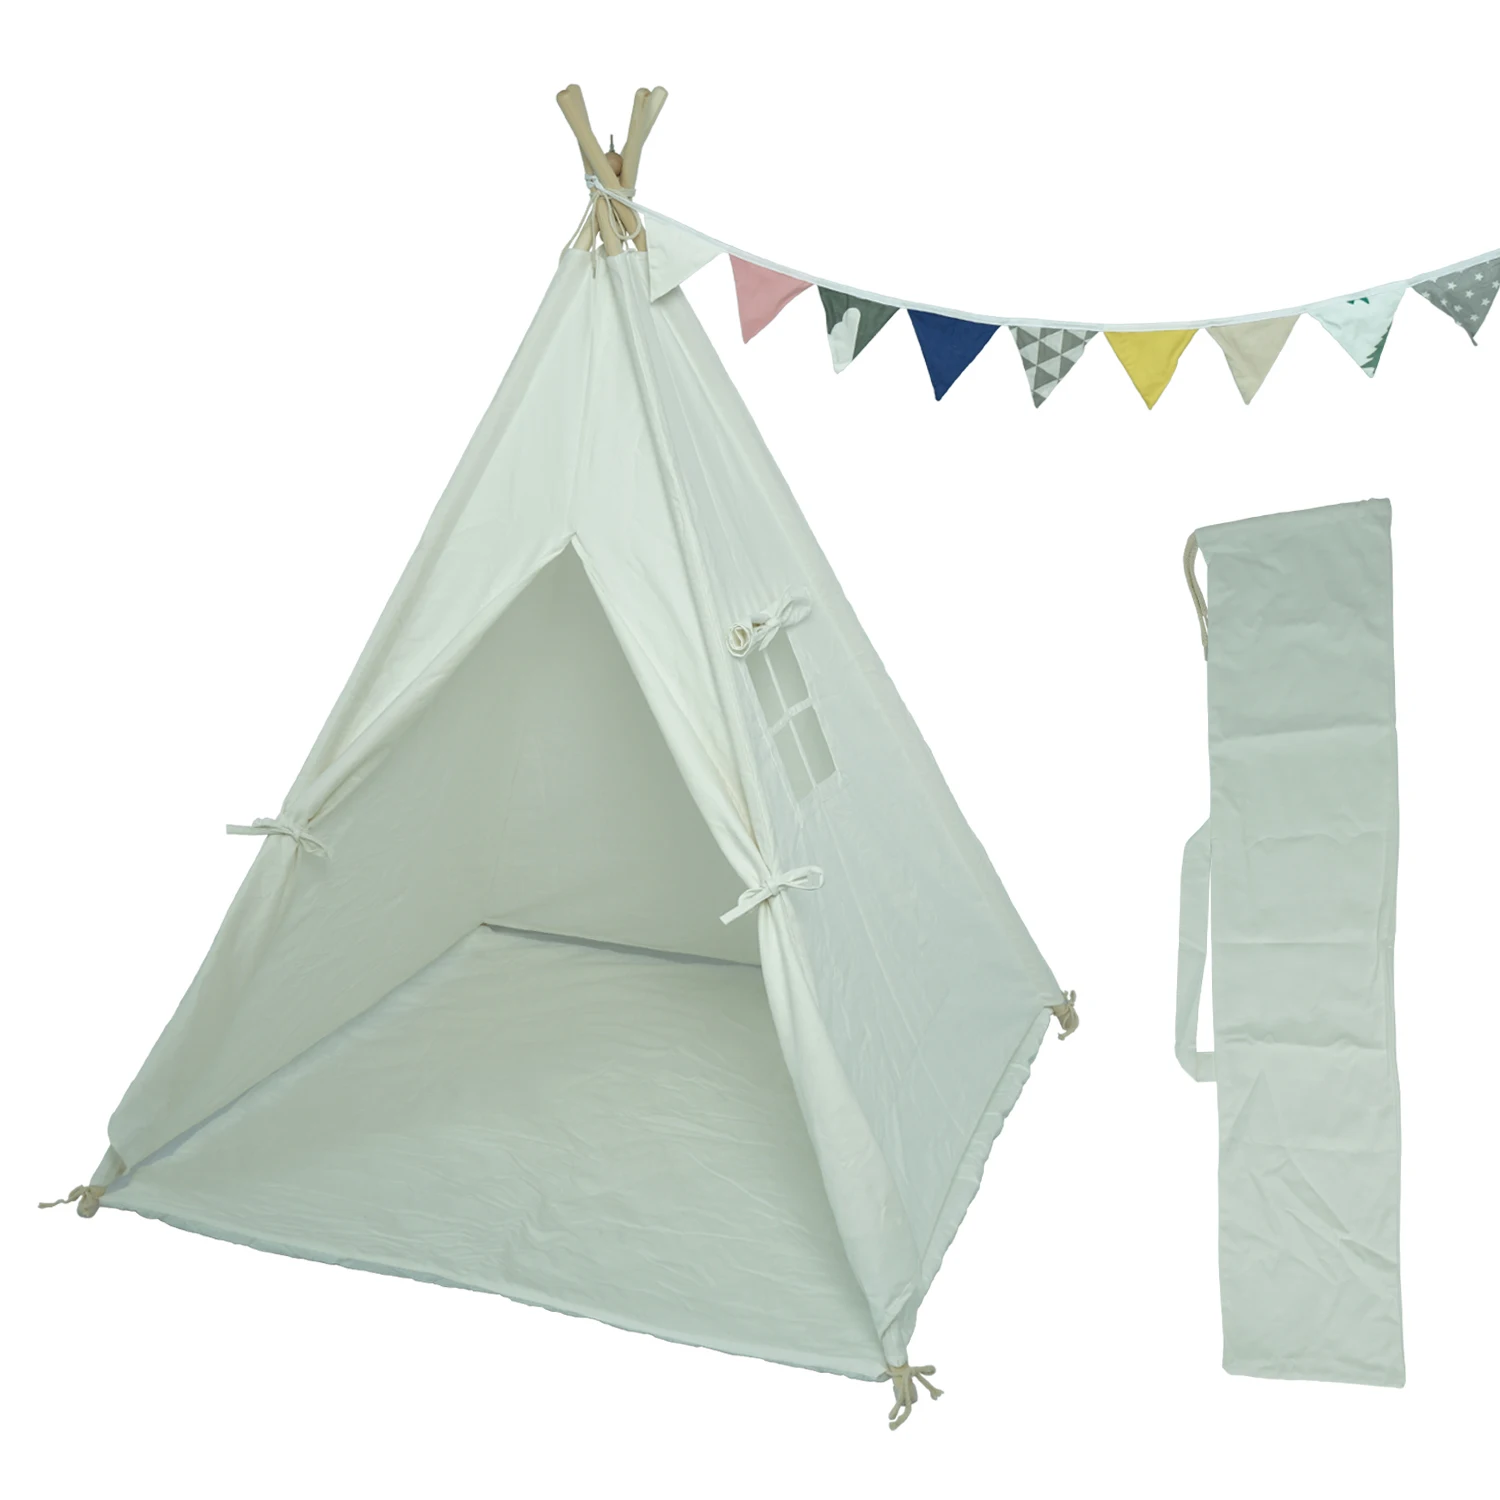 American Kids Tee-pee Play Tent Black White Rugby Stripe Playhouse Childrens for sale online 